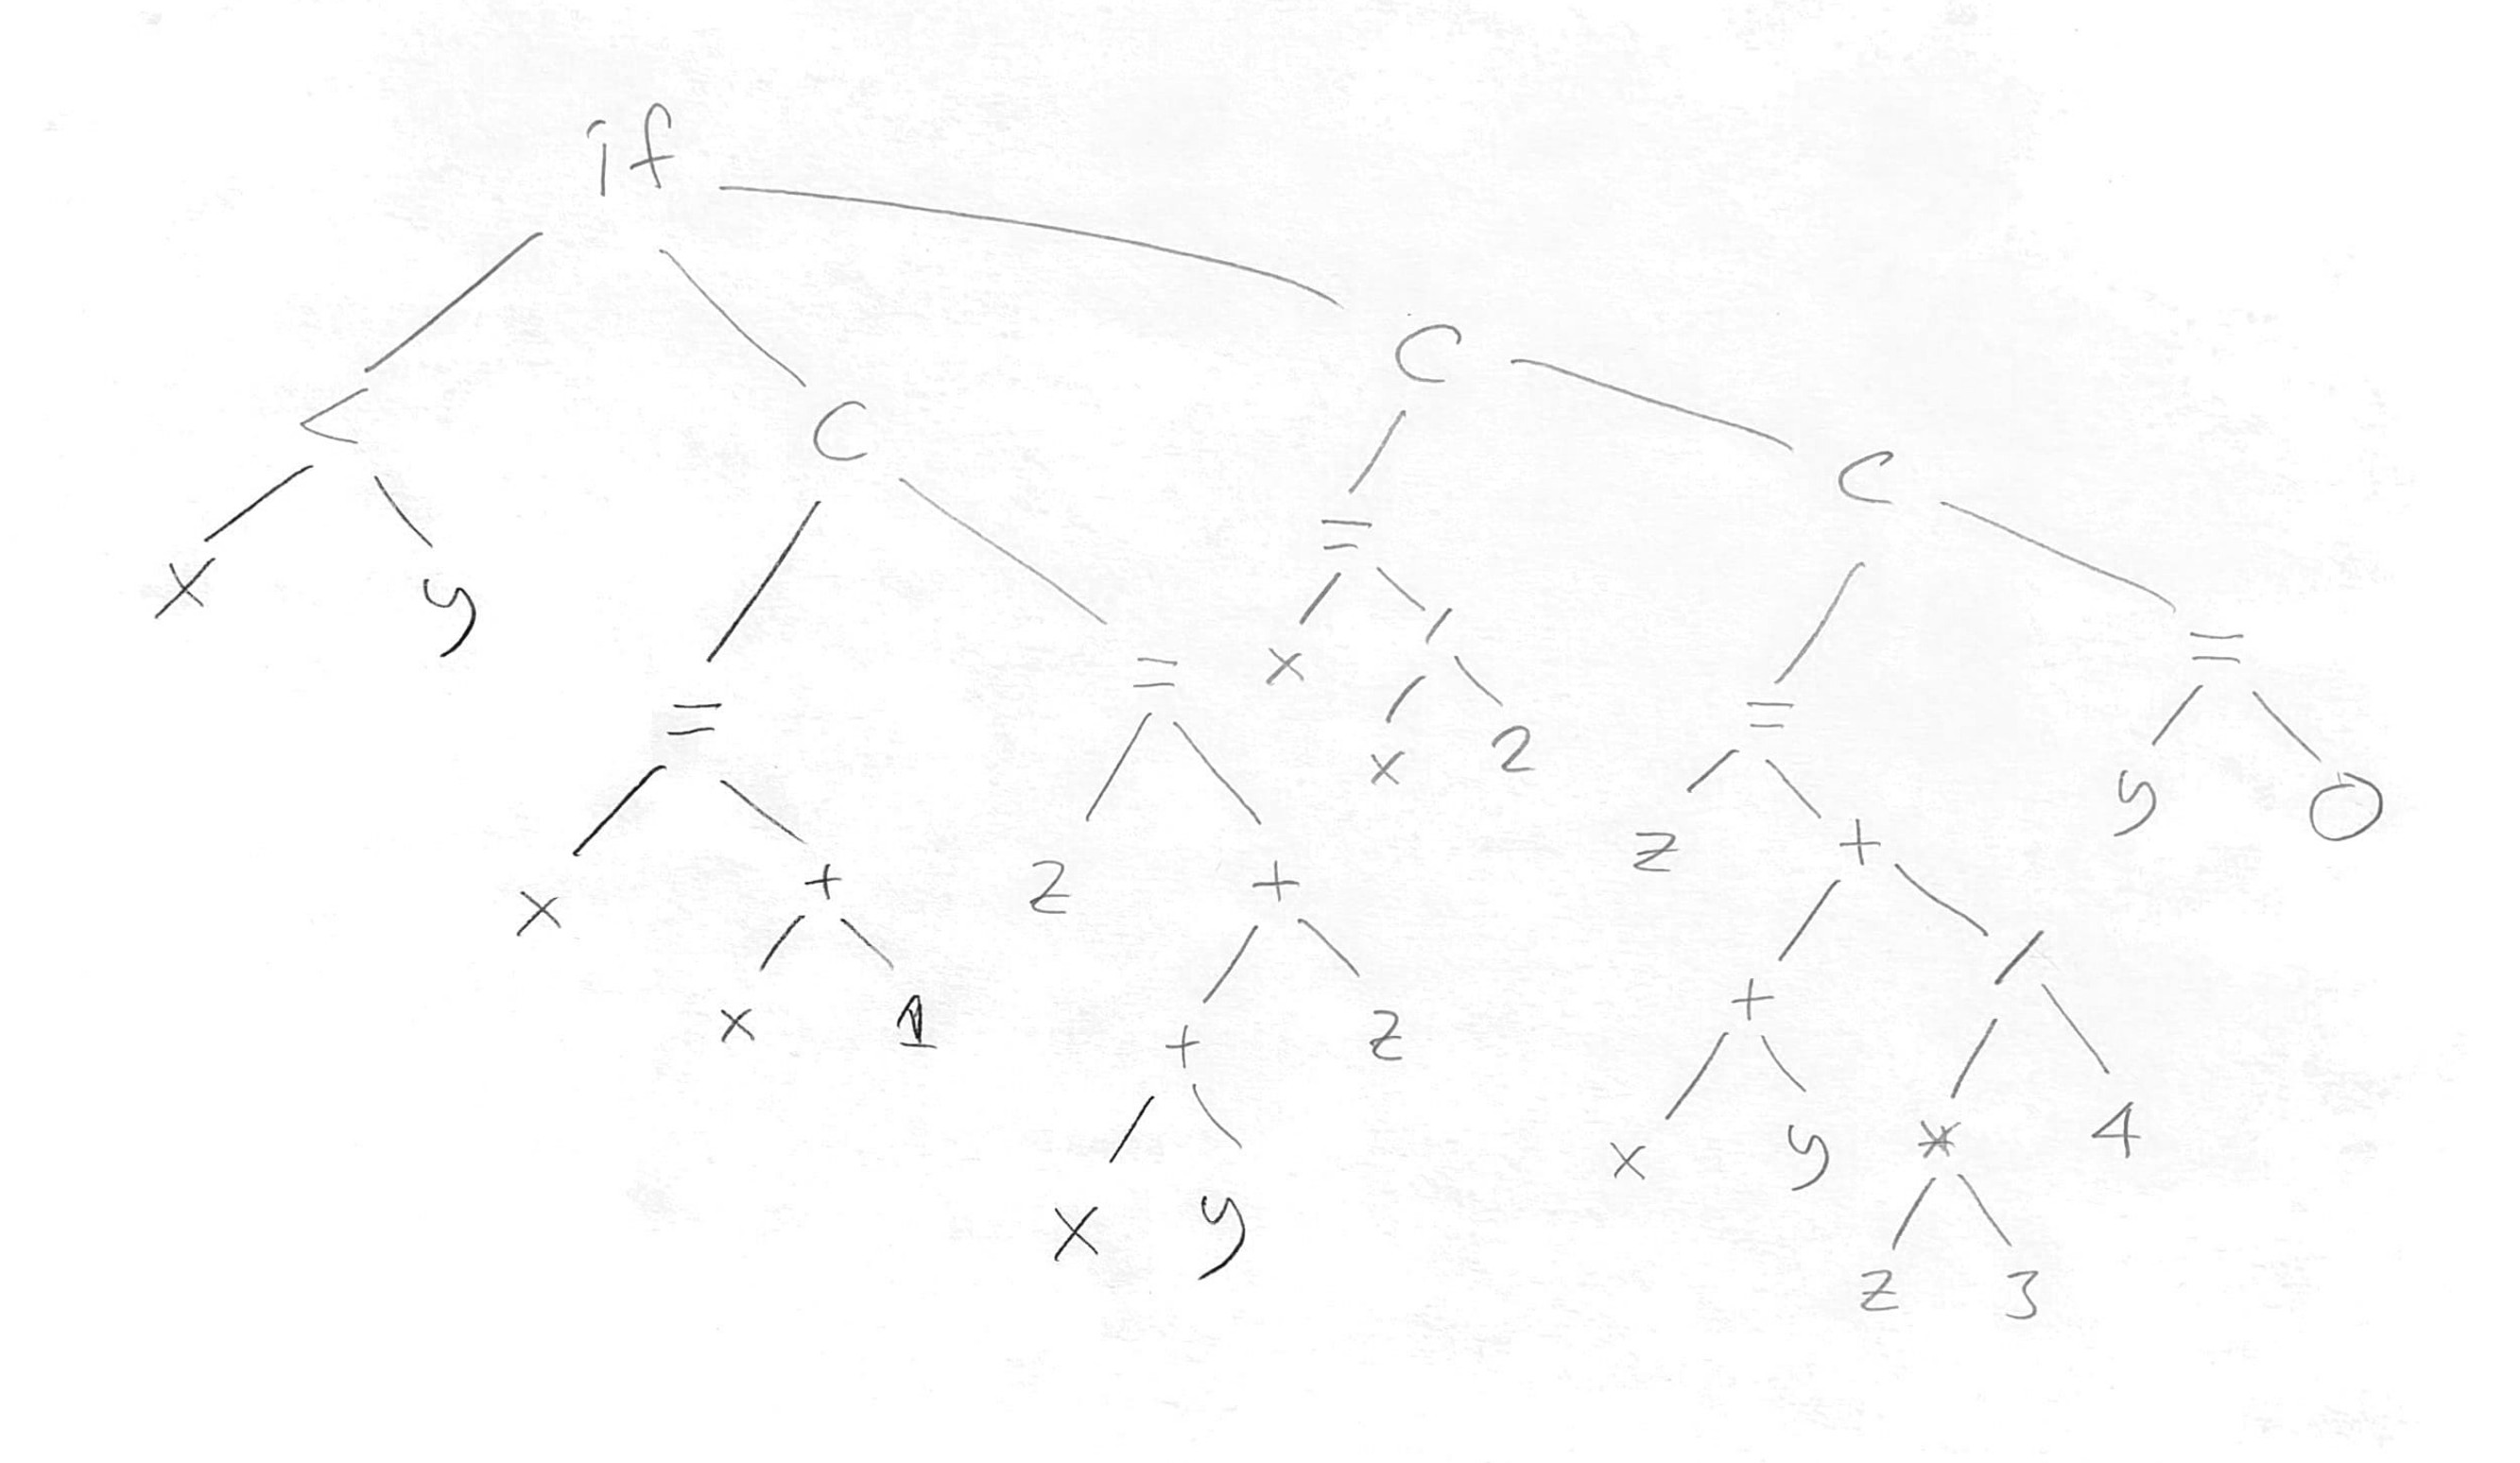 An (abstract) syntax tree